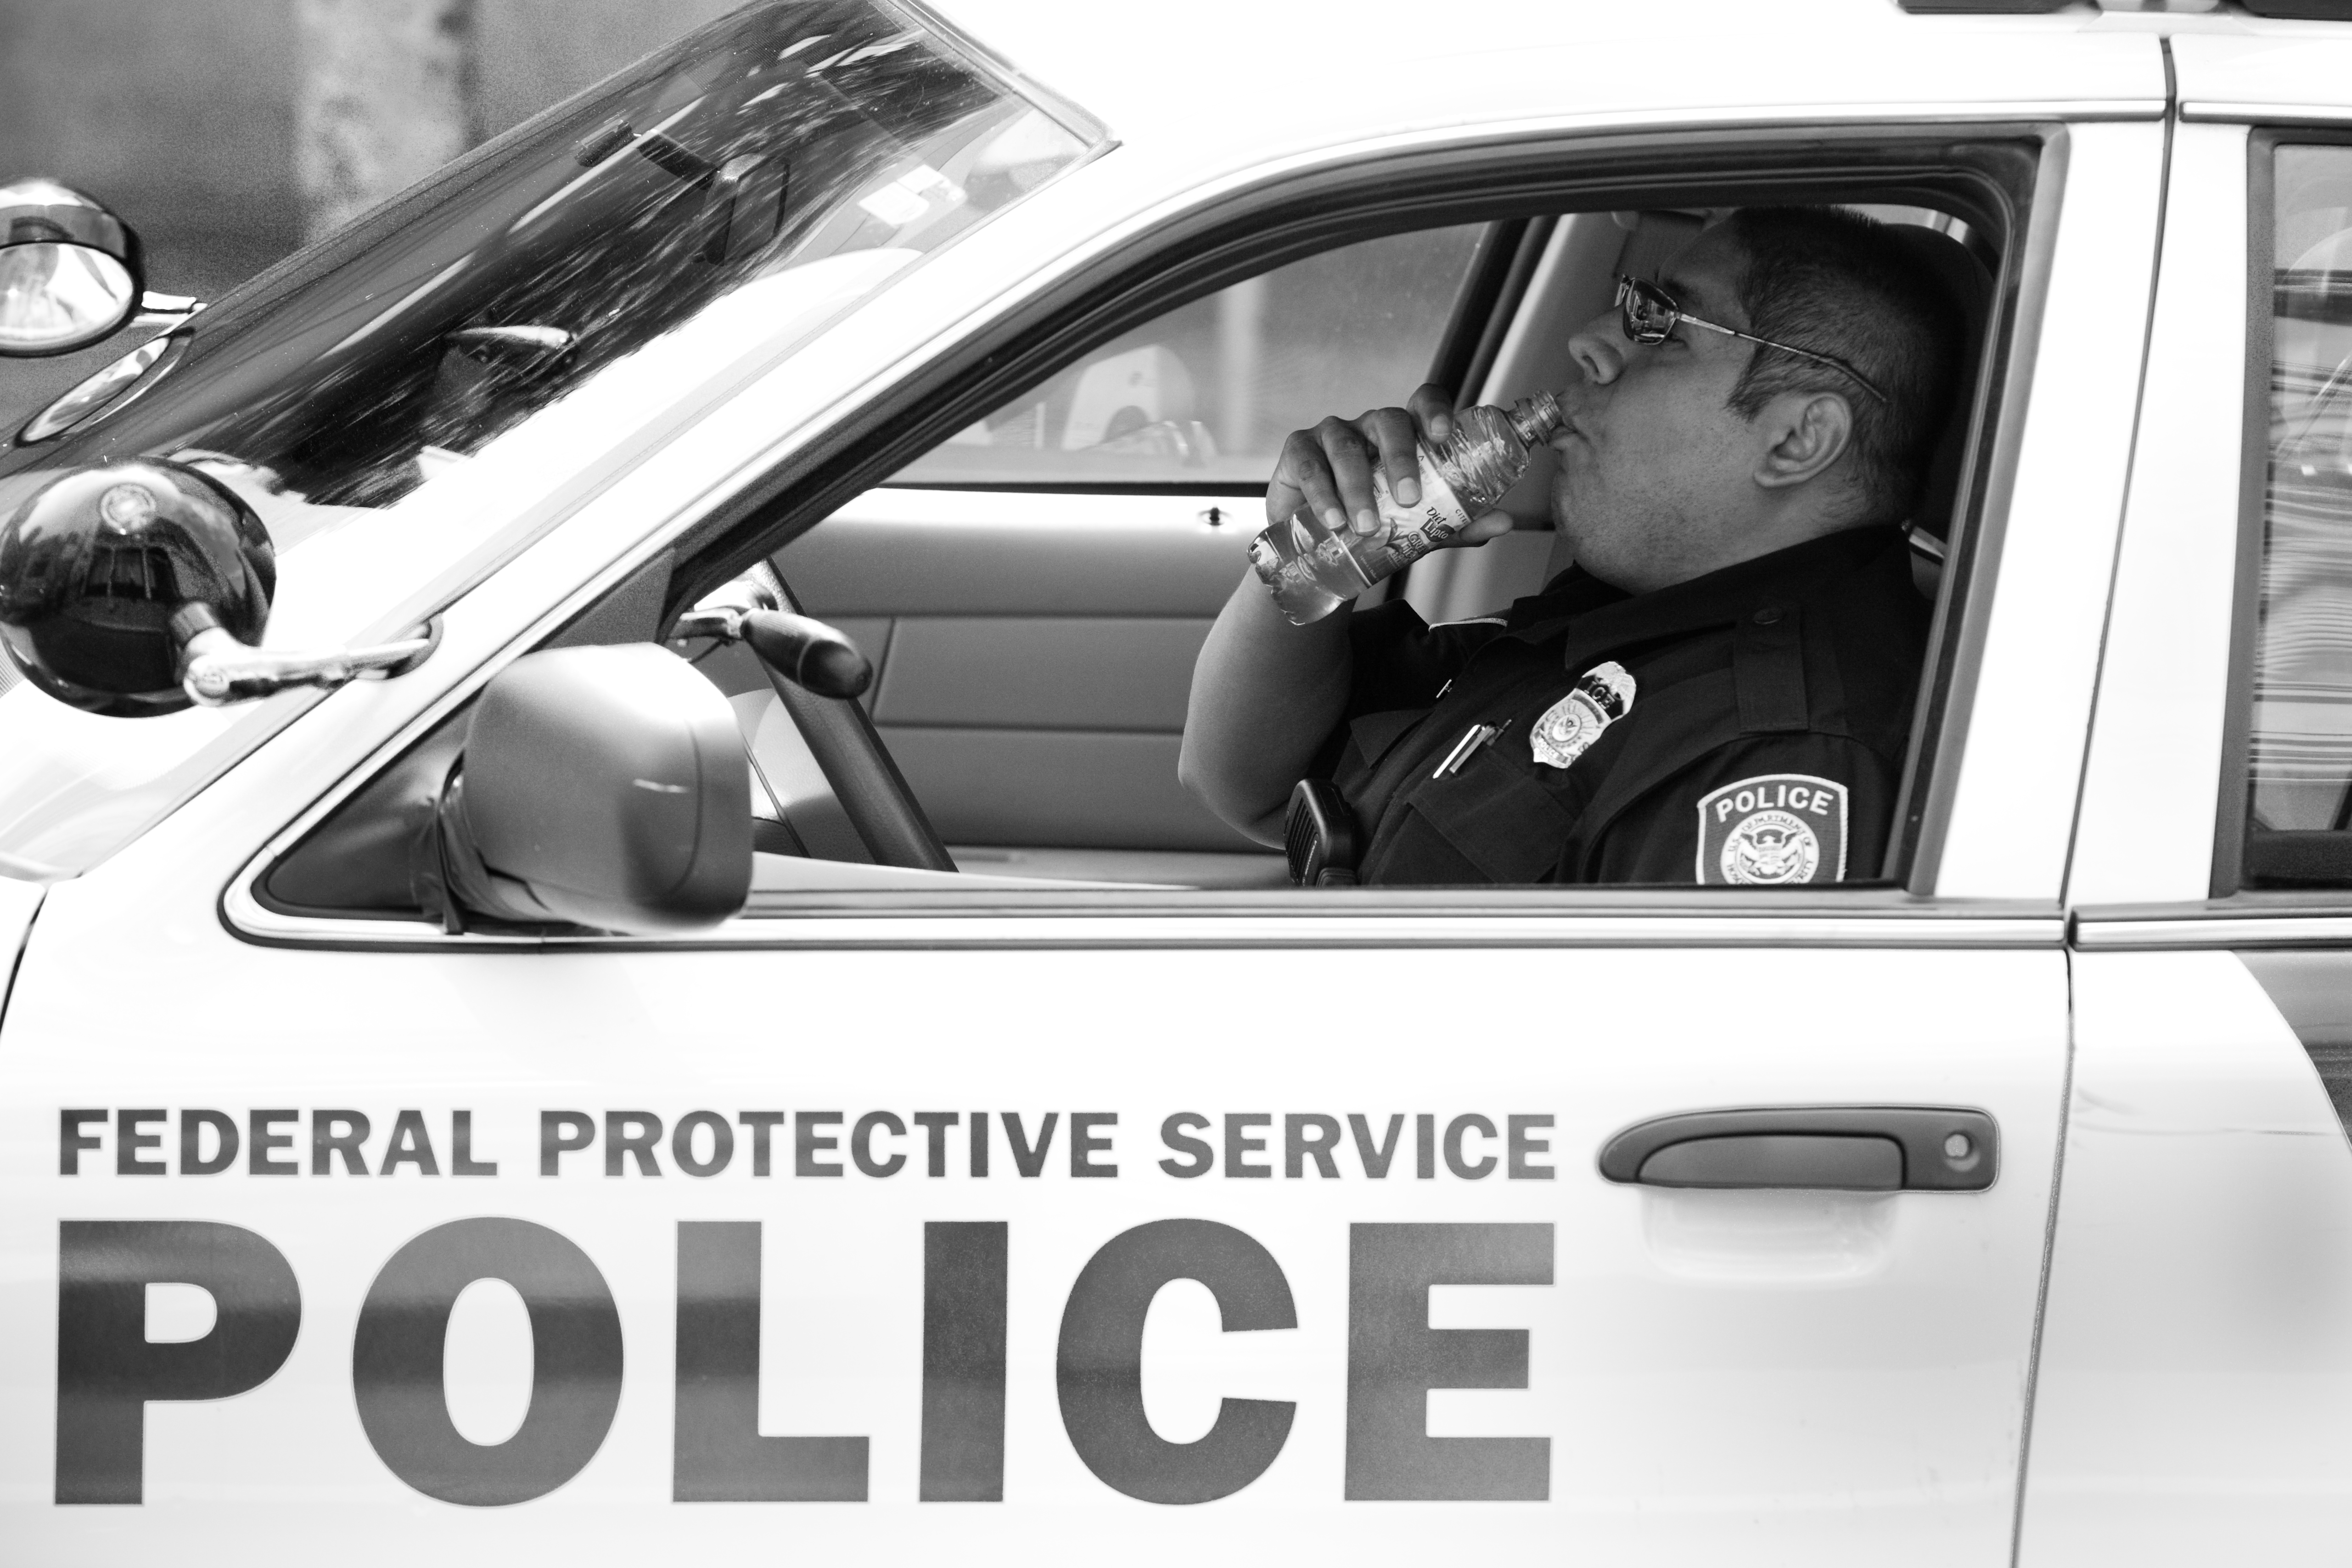 Federal Protective Service Police